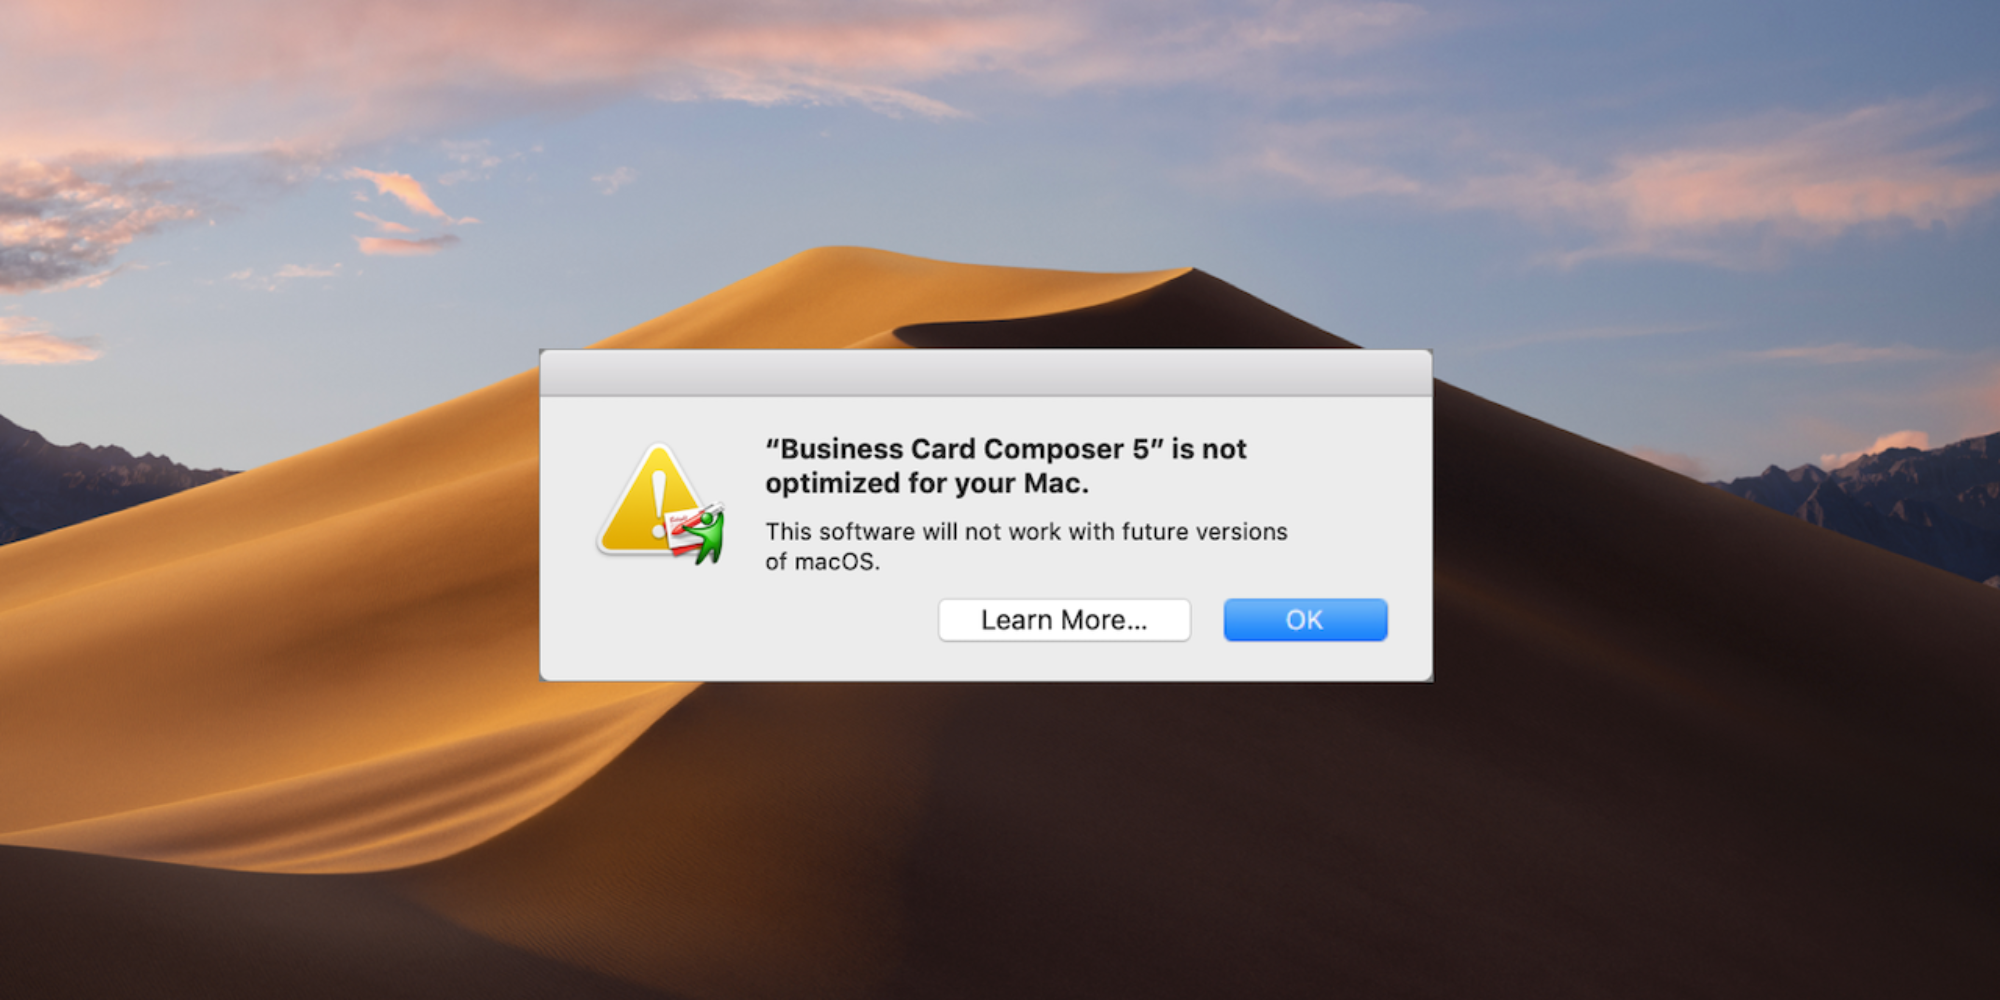 What’s with All These Dialogs Saying, “SomeApp is not optimized for your Mac”?